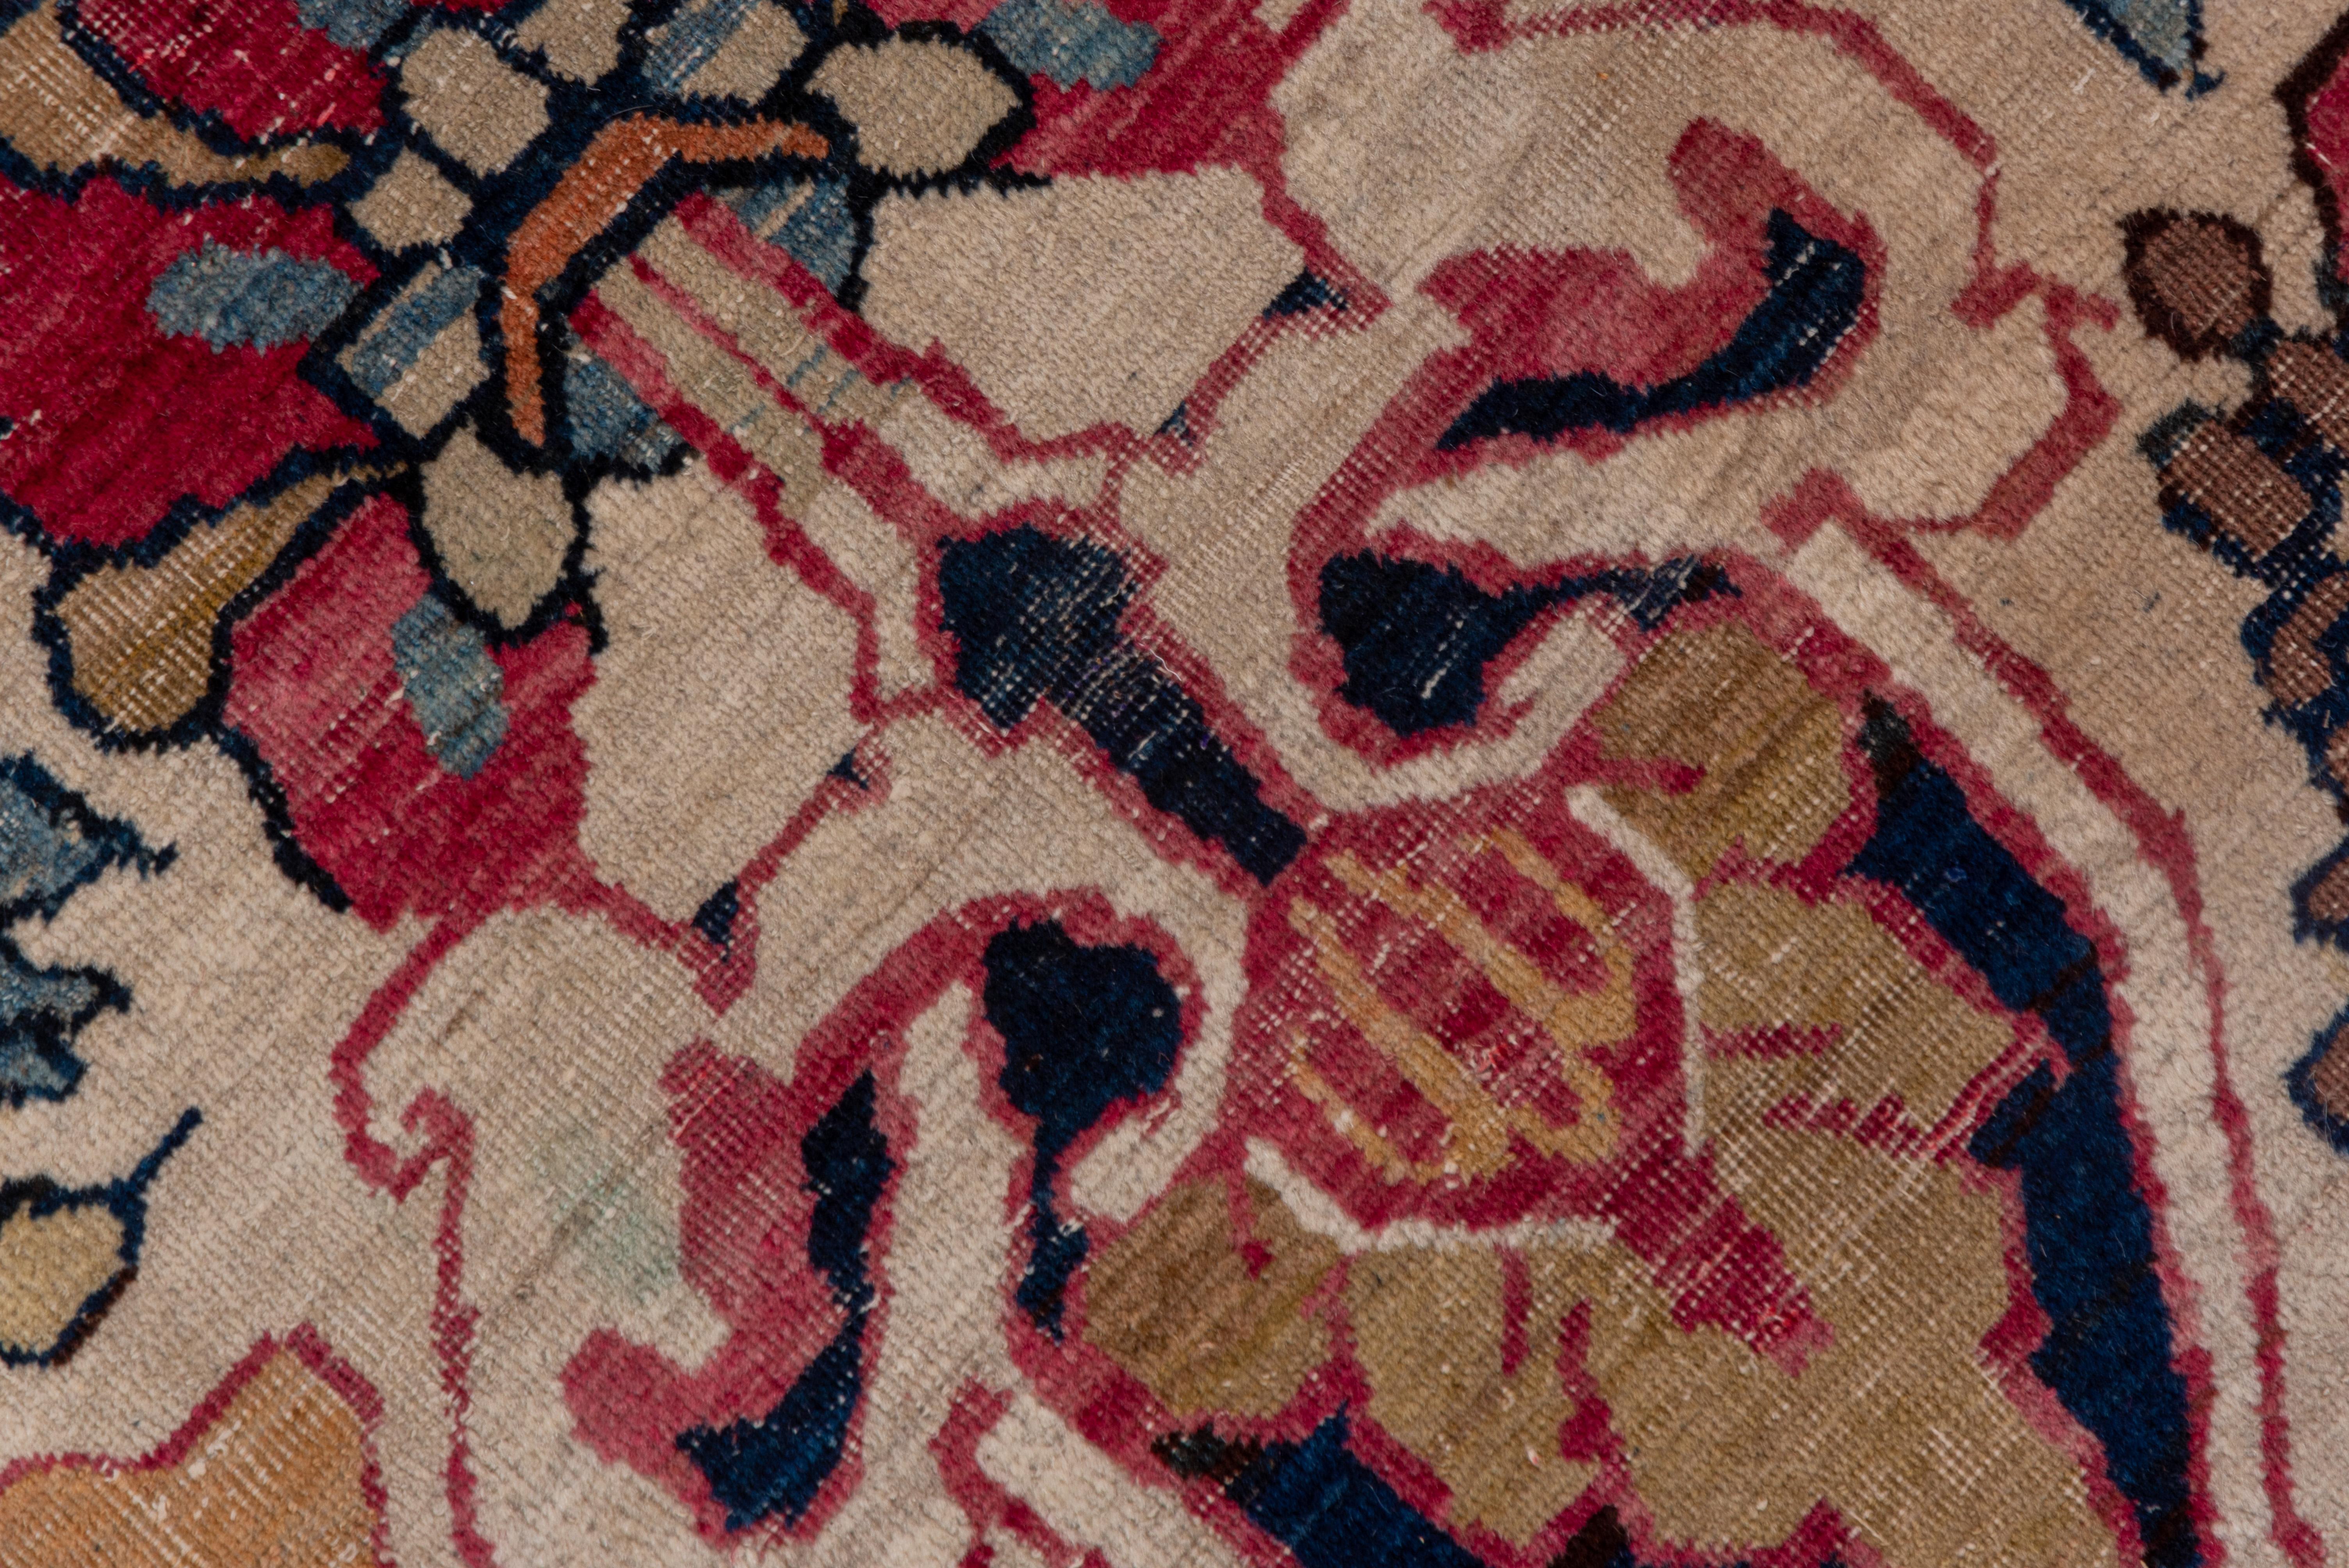 Early 20th Century Rare Antique Persian Lavar Kerman Carpet, Colorful Outer Border and Accents